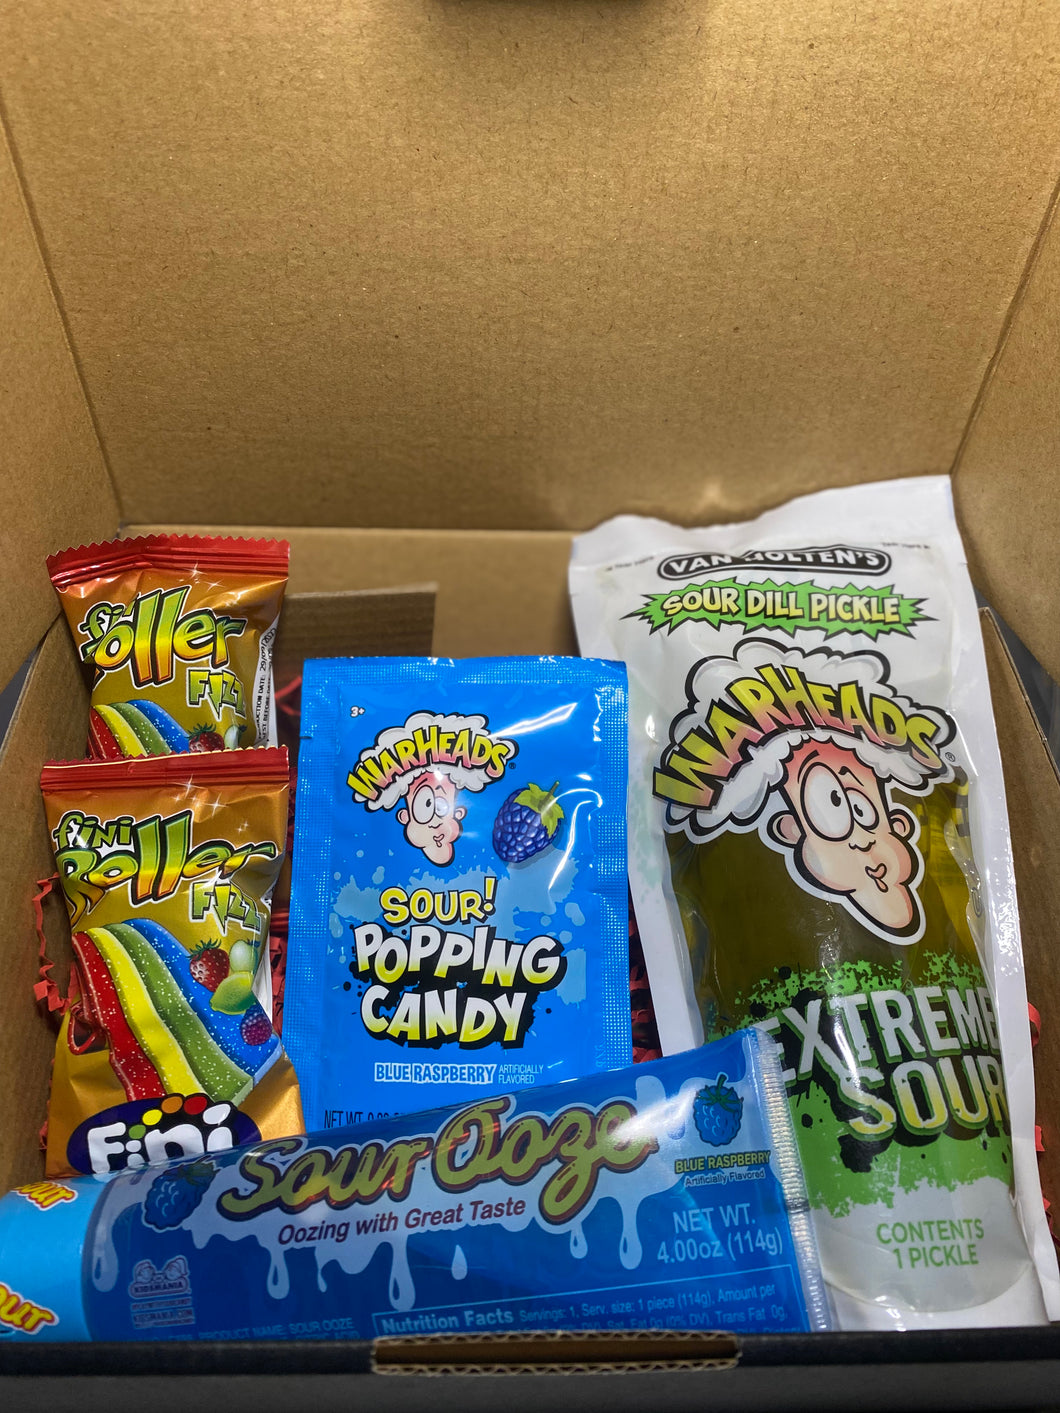 Warheads Extreme Sour Pickle Kit